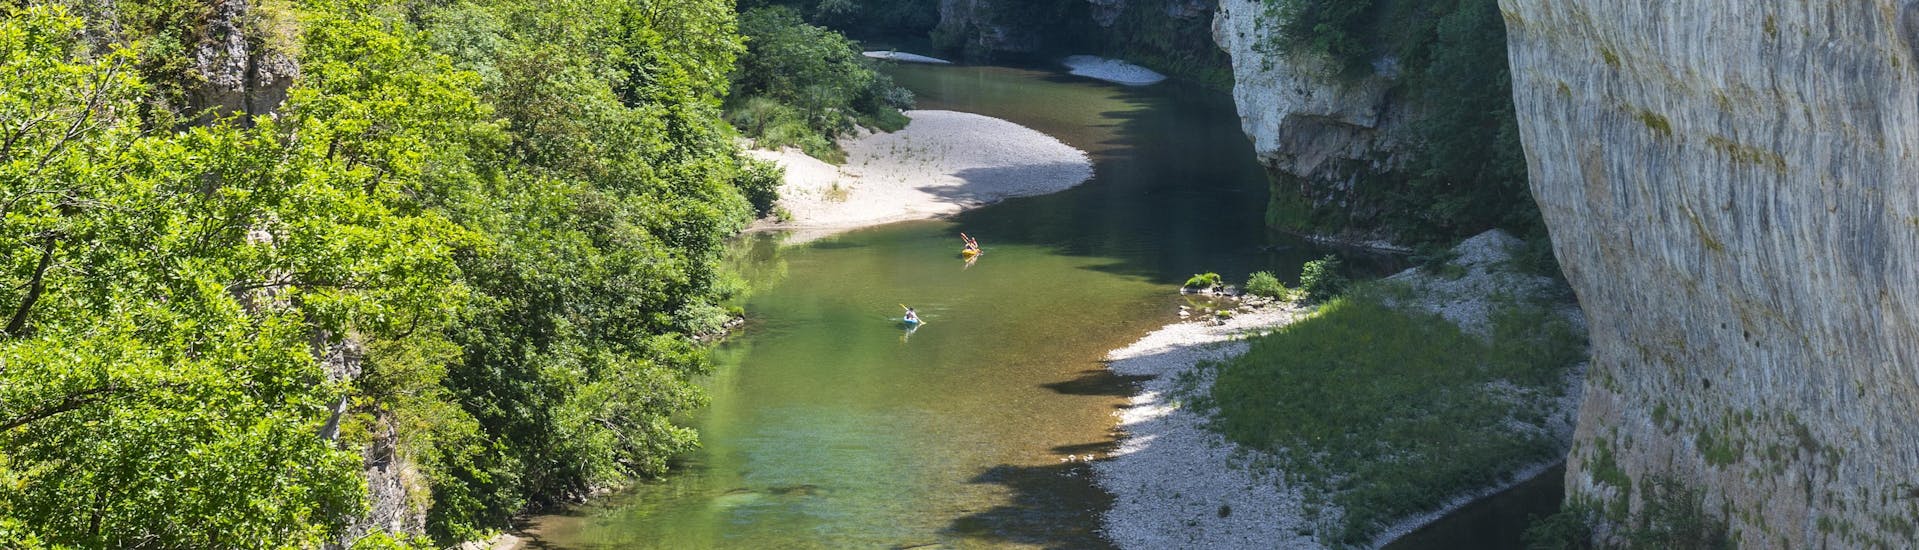 Holidaymakers are canoeing in the middle of the impressive gorges of the Tarn in France.